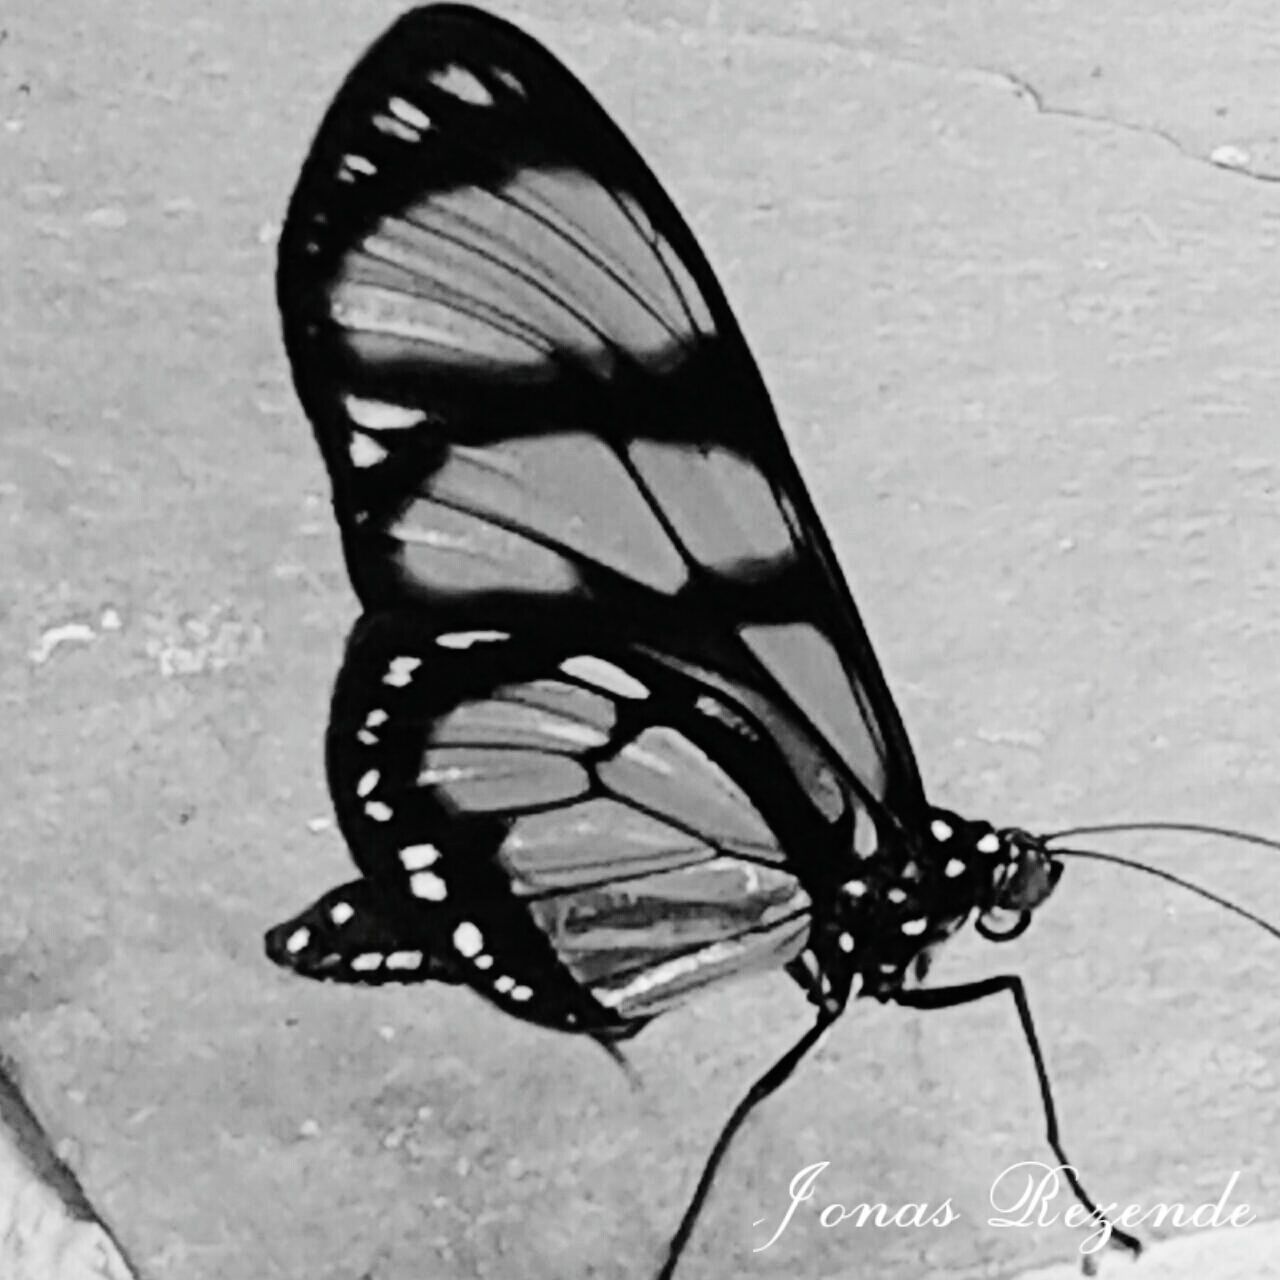 high angle view, animal themes, insect, one animal, close-up, shadow, animal markings, black color, butterfly - insect, no people, pattern, day, outdoors, animals in the wild, sunlight, striped, wall - building feature, wildlife, street, ground